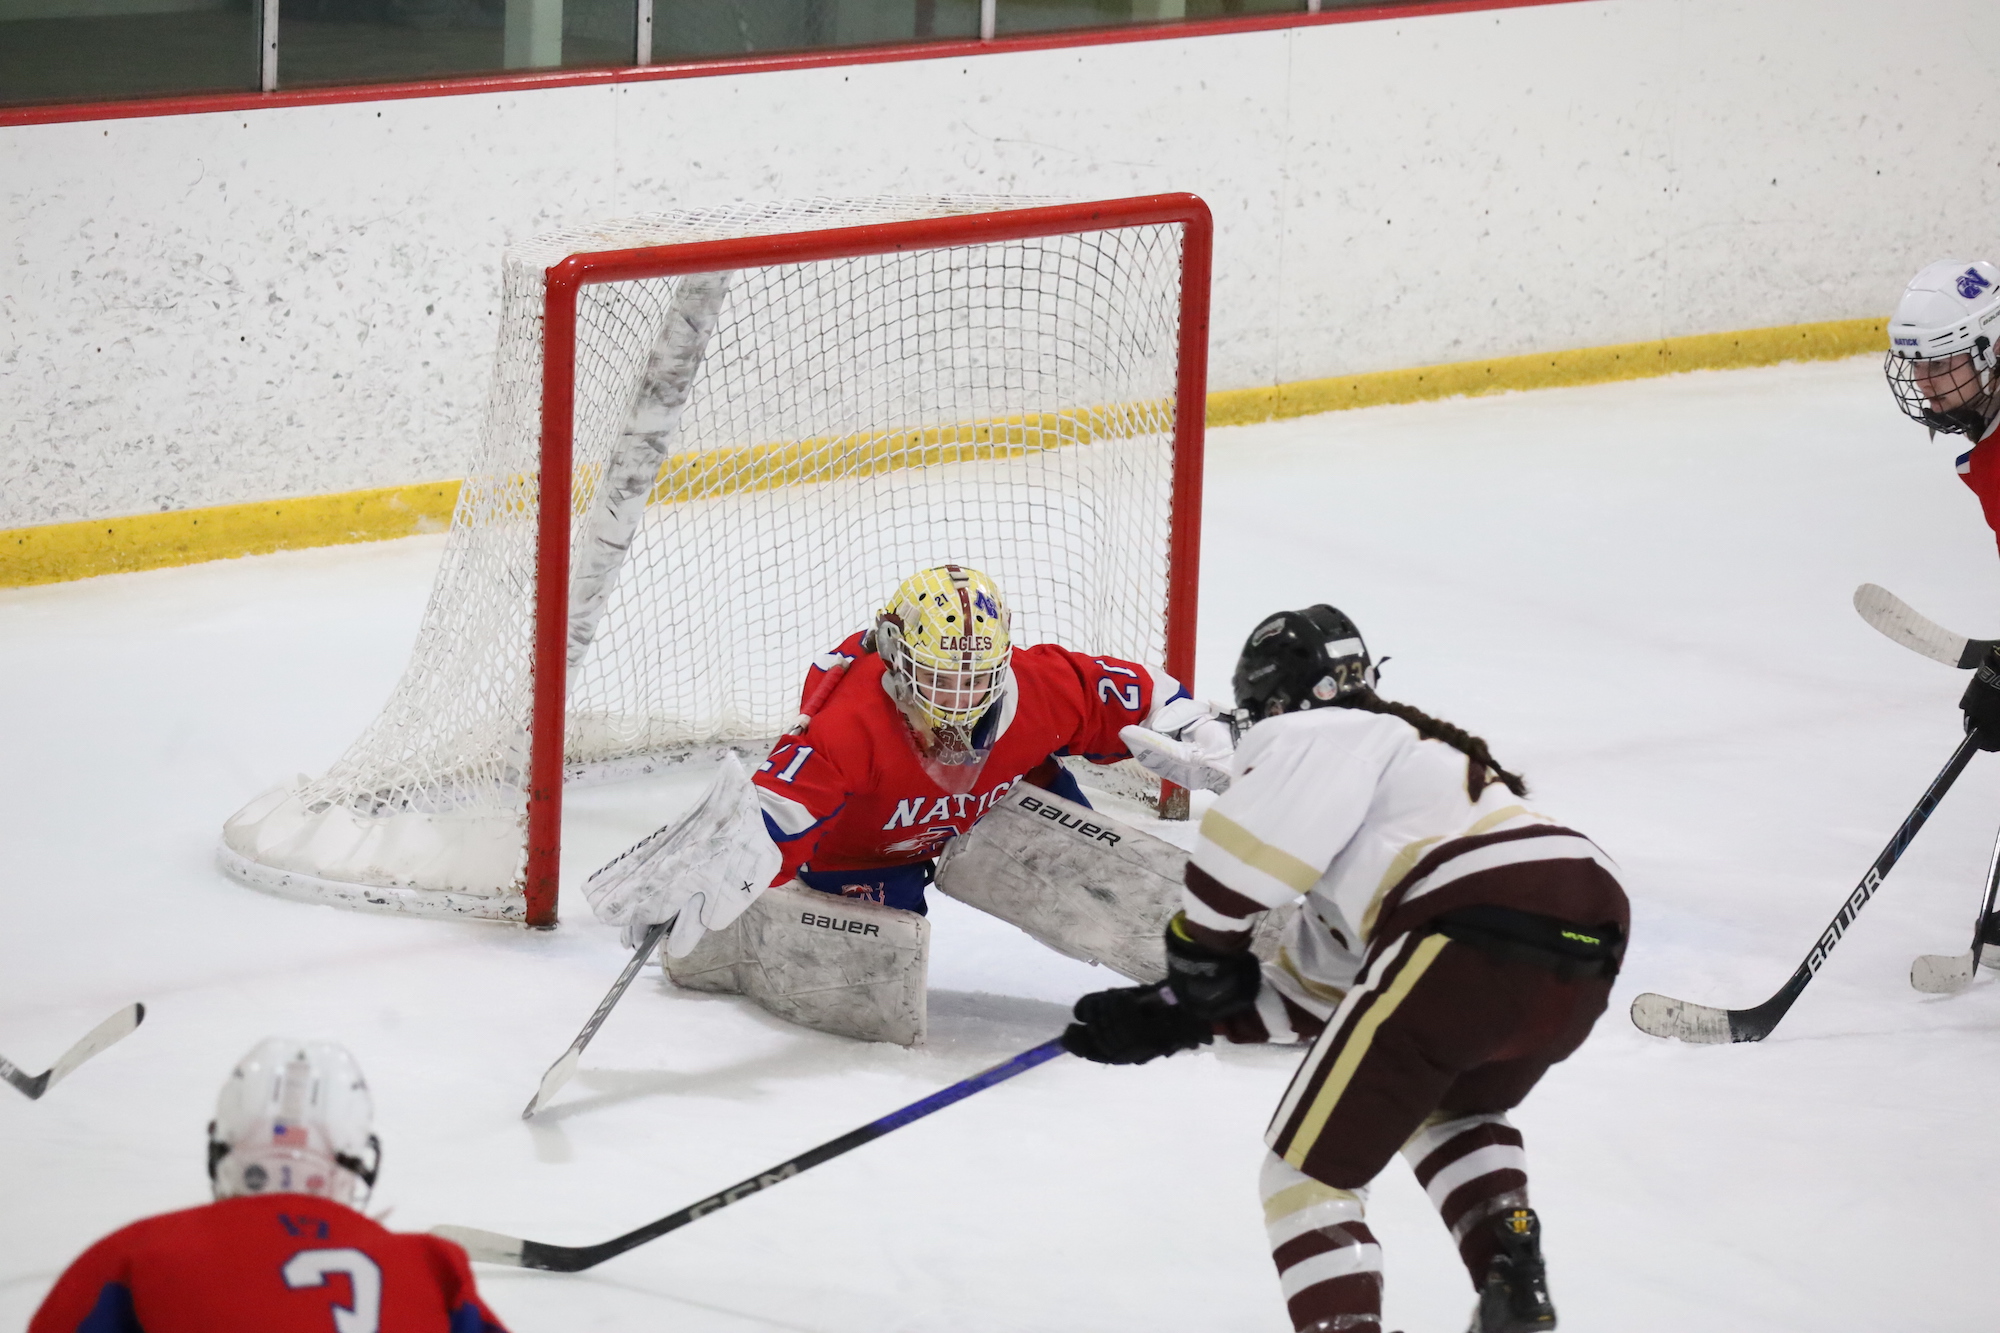 Algonquin takes down Natick in defense-forward girls hockey matchup